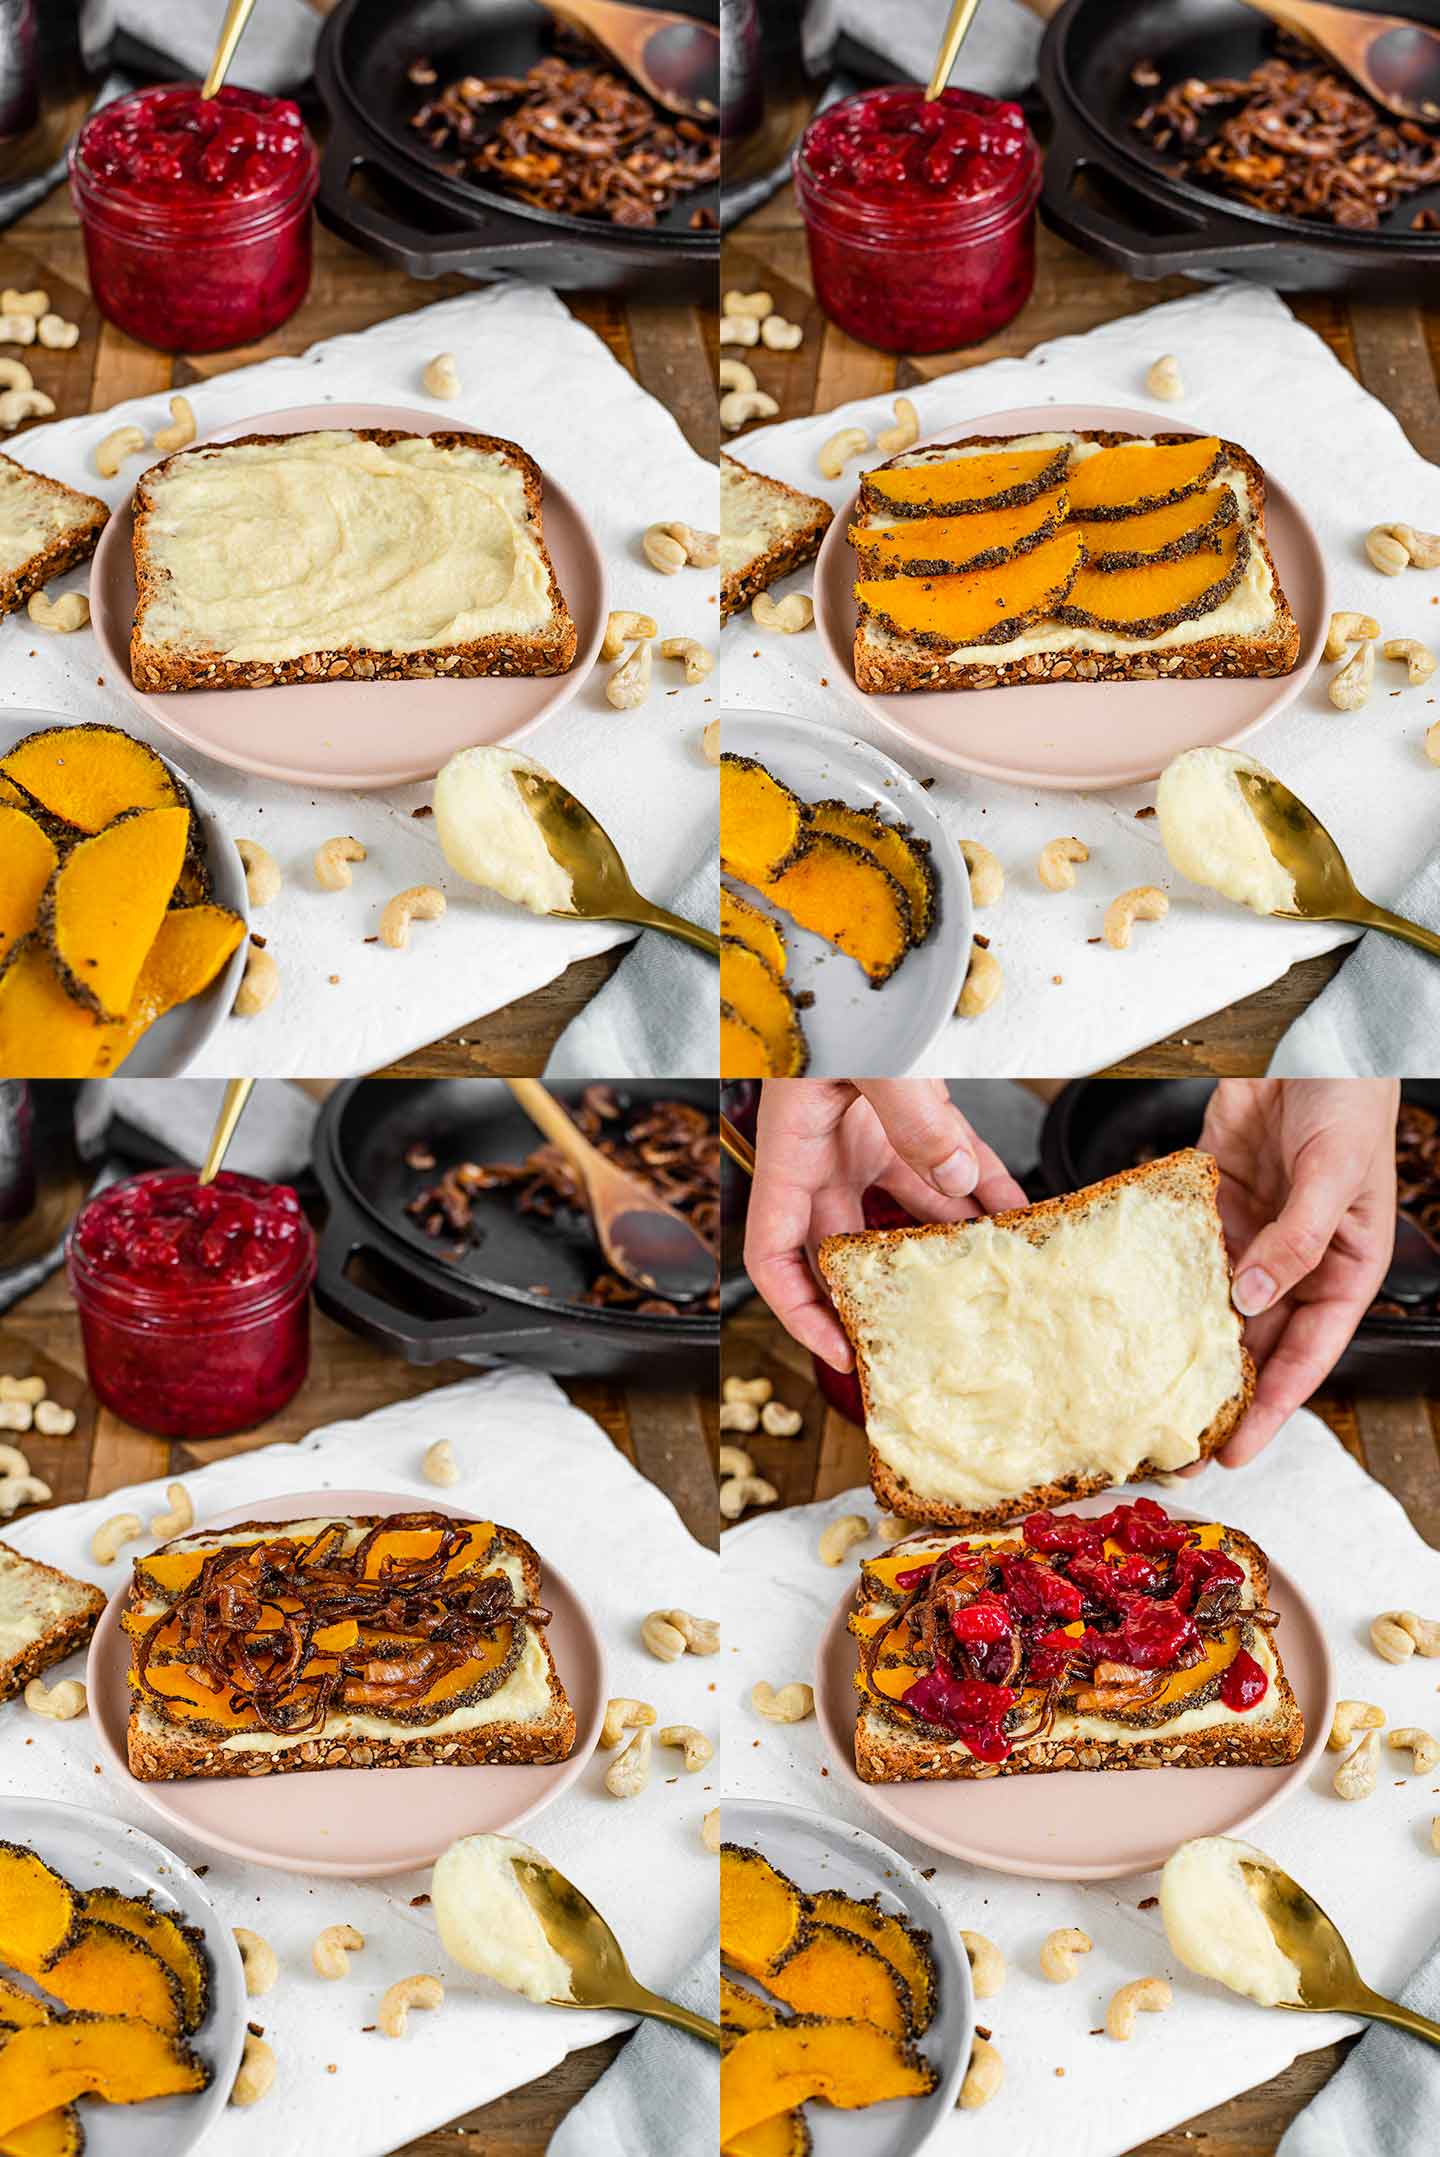 Grid of four process photos of building the sandwich. Mozzarella is spread on a toasted slice of bread. Then, slices of peppered squash are laid, drizzled with balsamic onions, and leftover cranberry sauce!